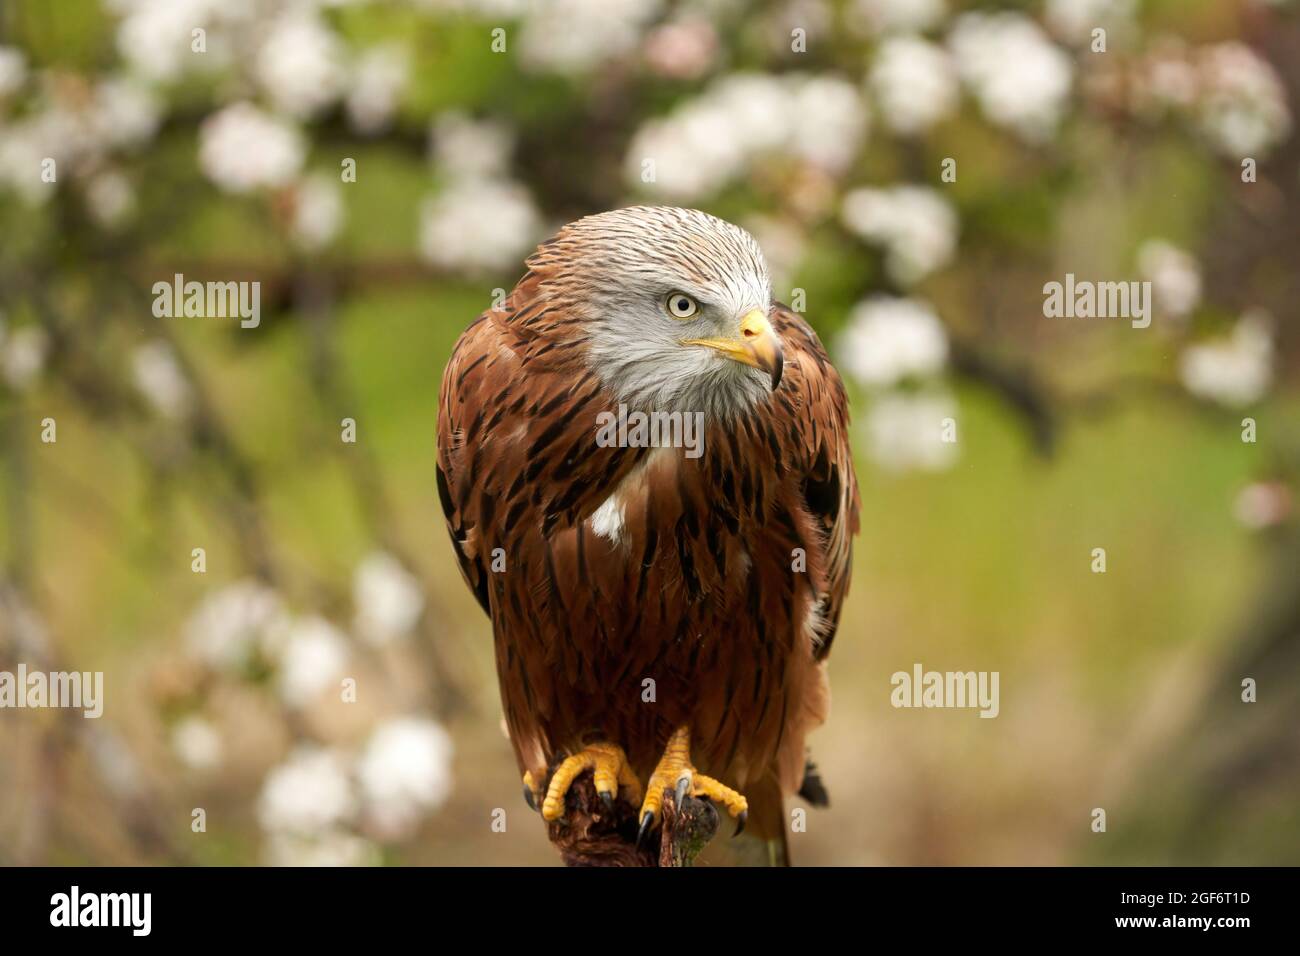 Red kite, in a tree with white blossom. Bird of prey portrait with yellow bill and red plumage and blue gray head Stock Photo